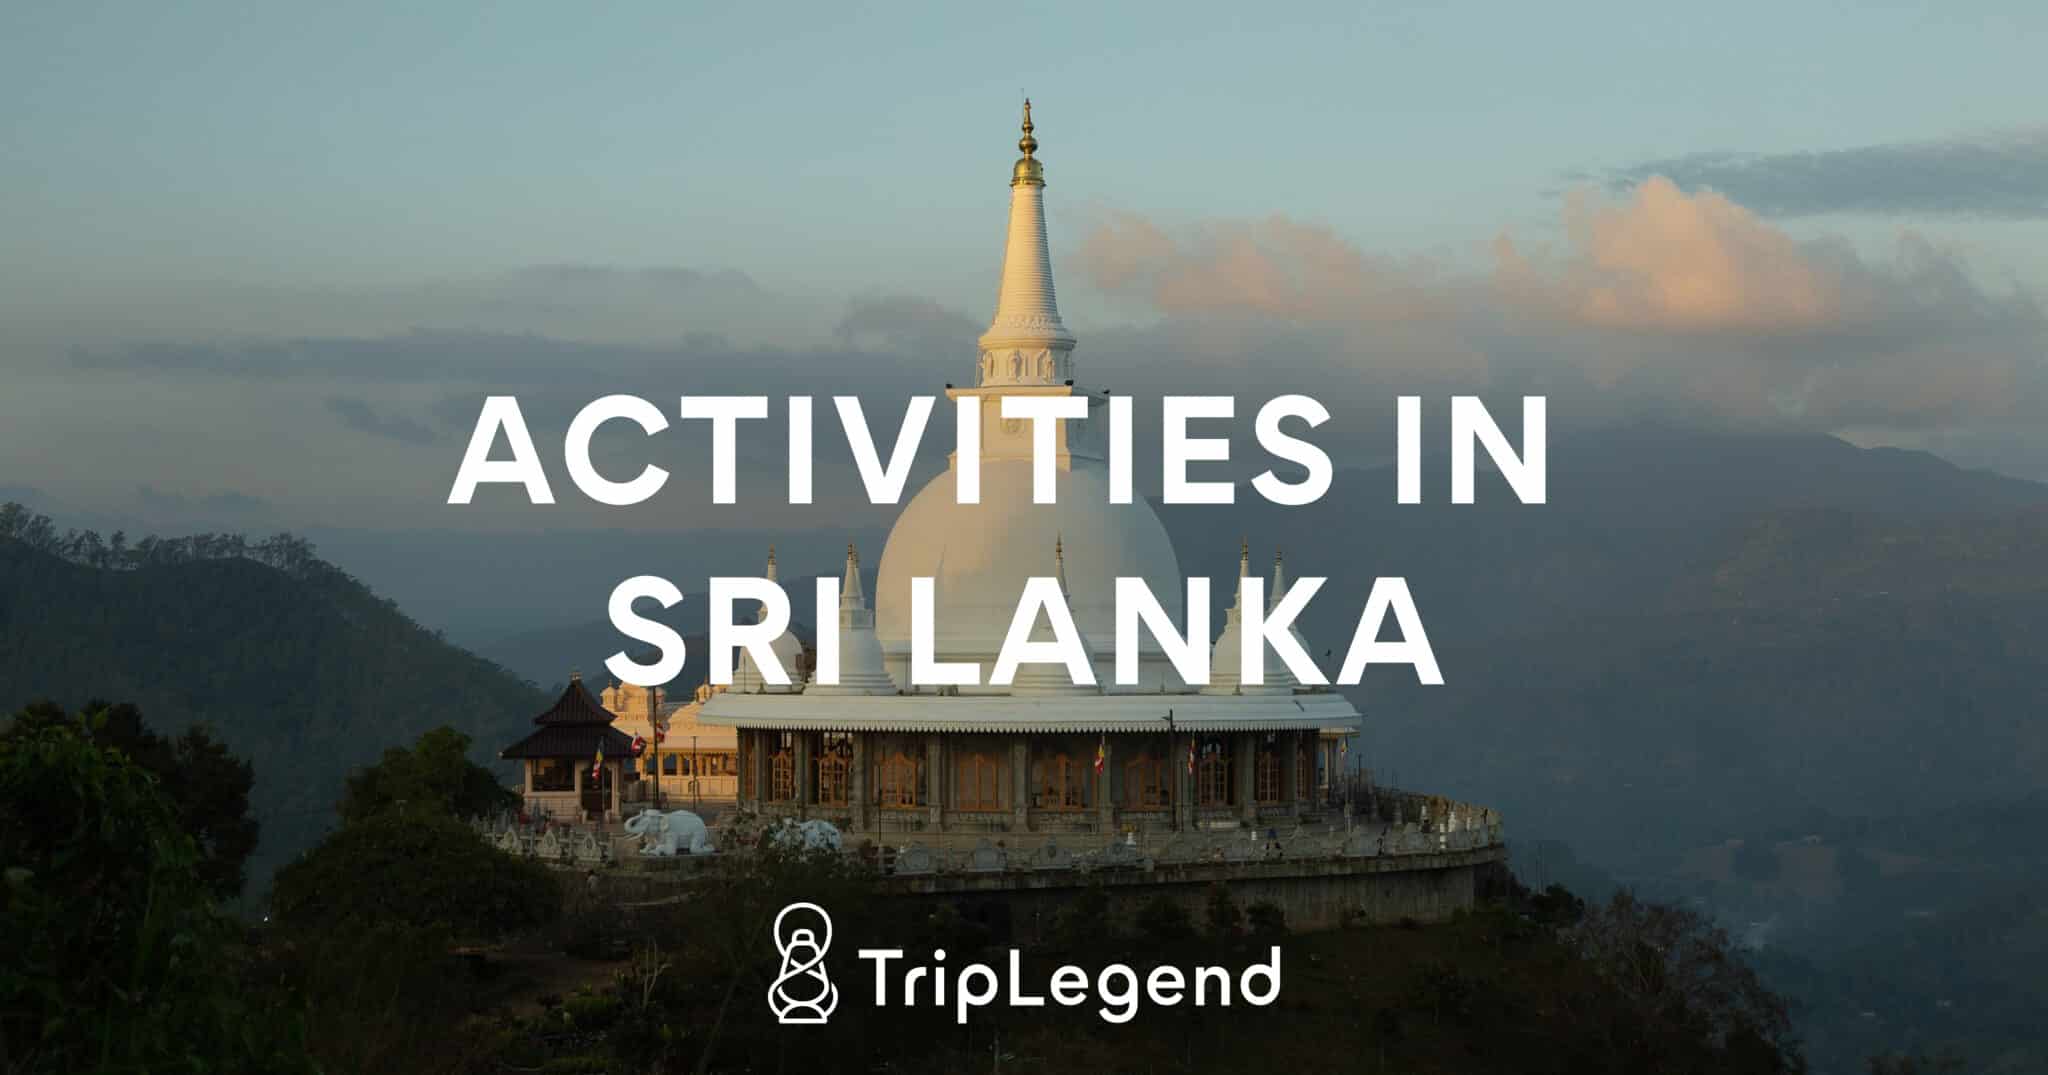 Feature image for the article about activities in Sri Lanka